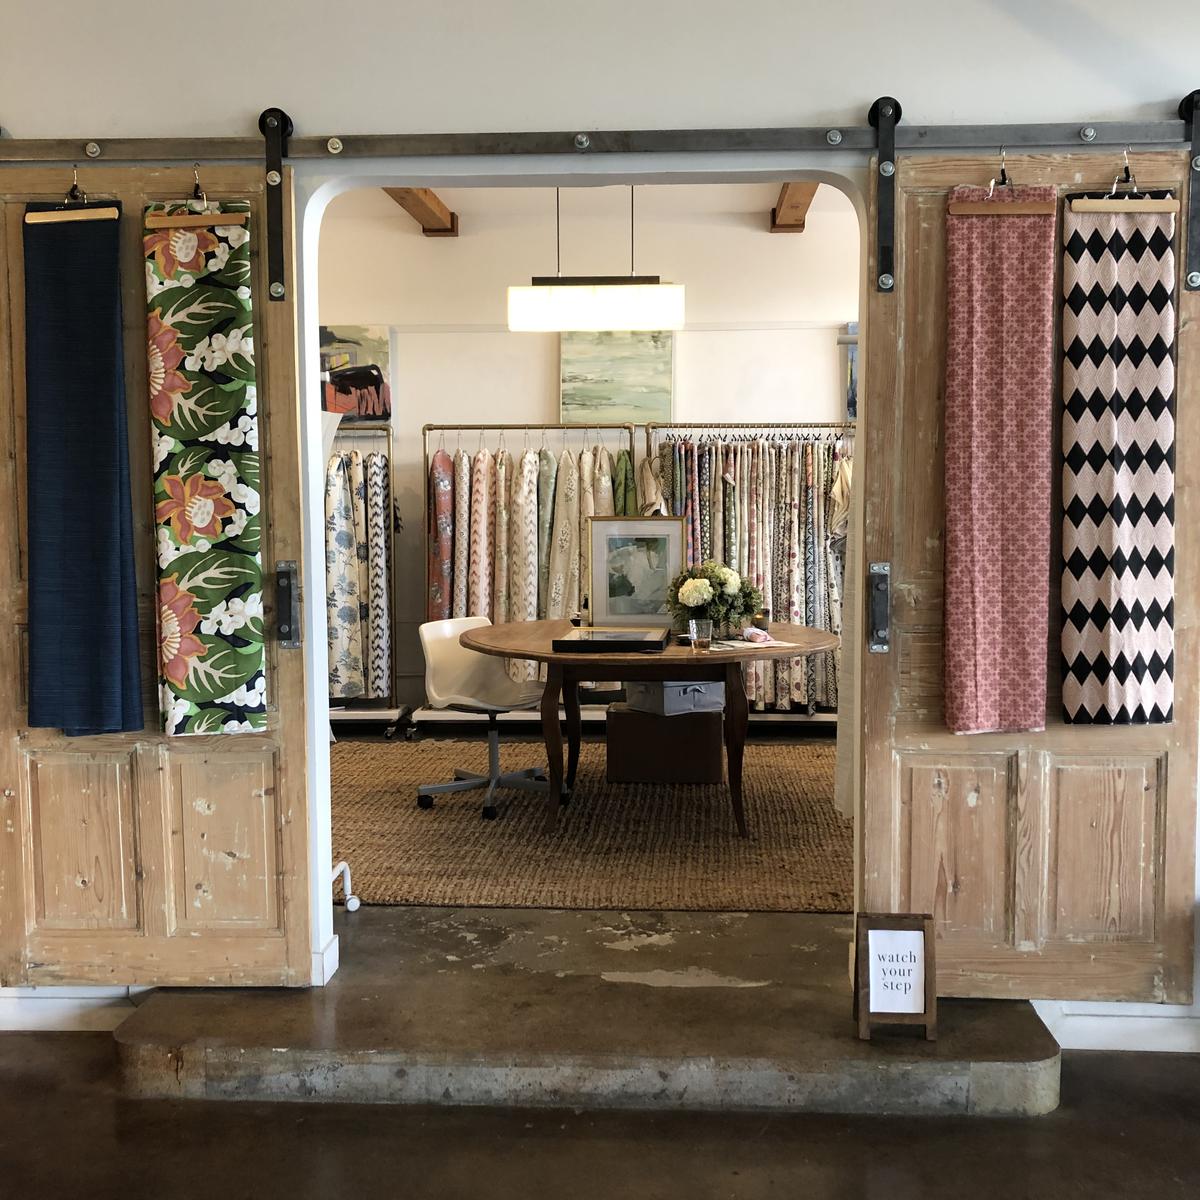 How a traveling design pop-up is adapting to a travel-wary world